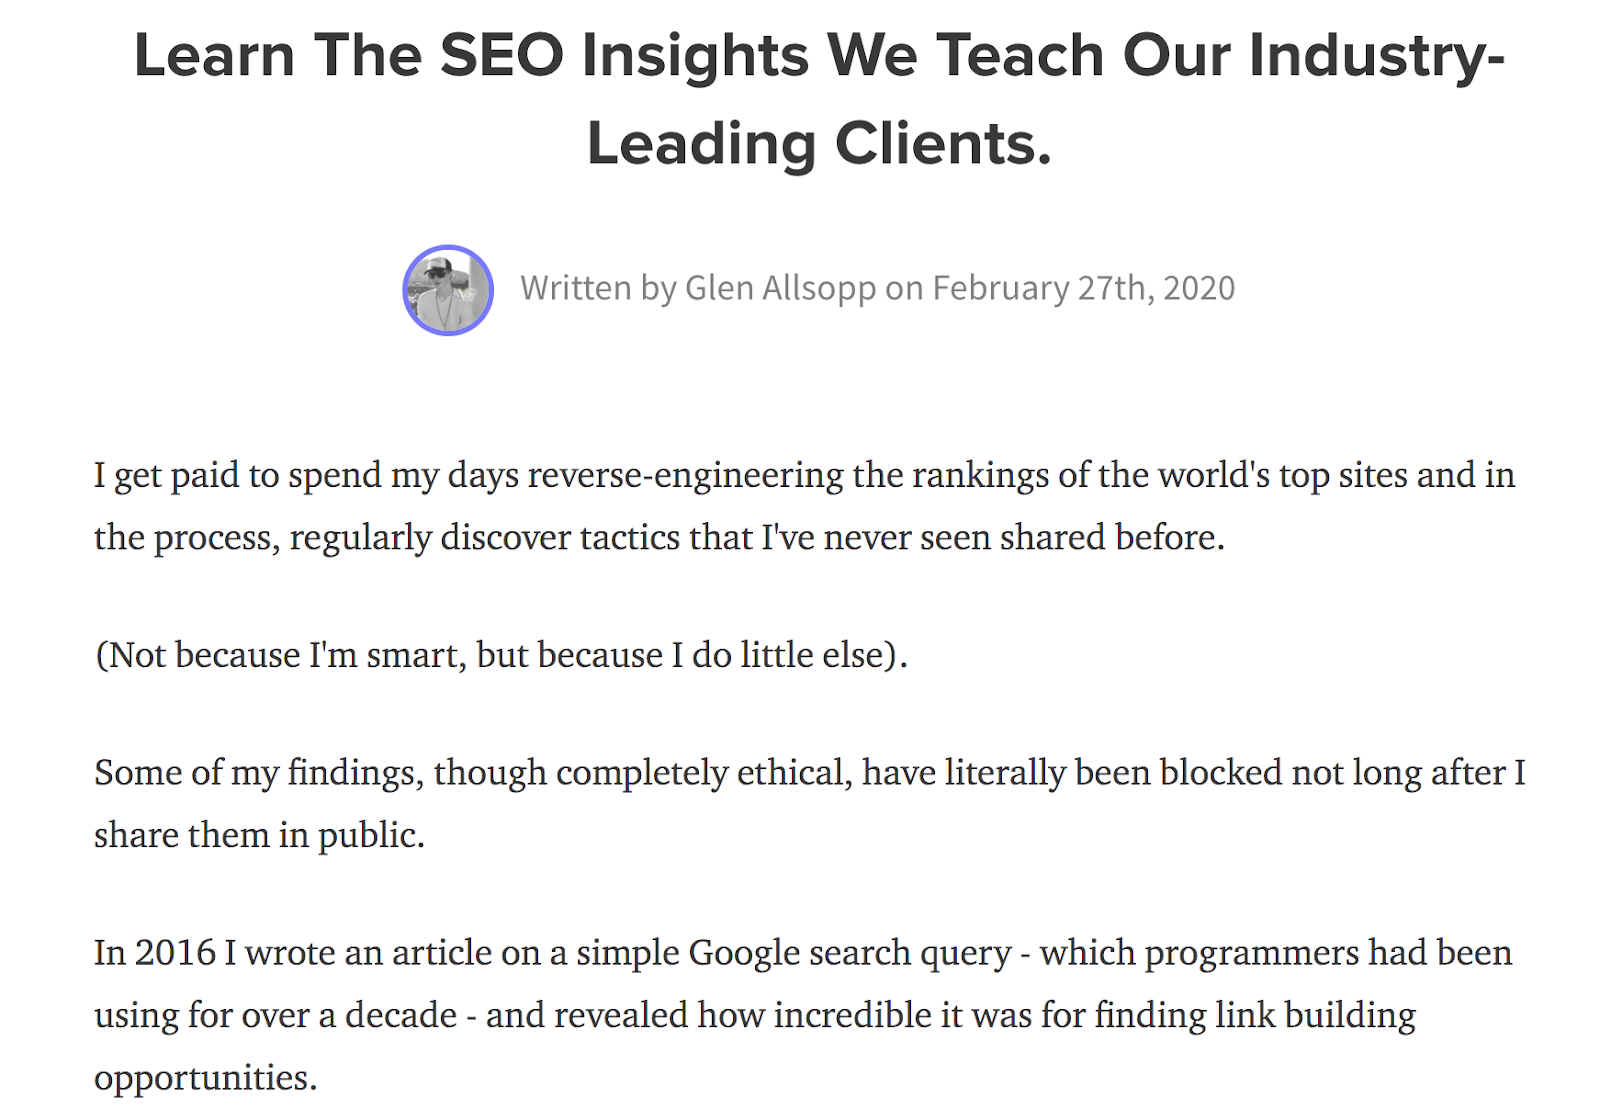 Example of an About Section to Boost Credibility with Blog Readers